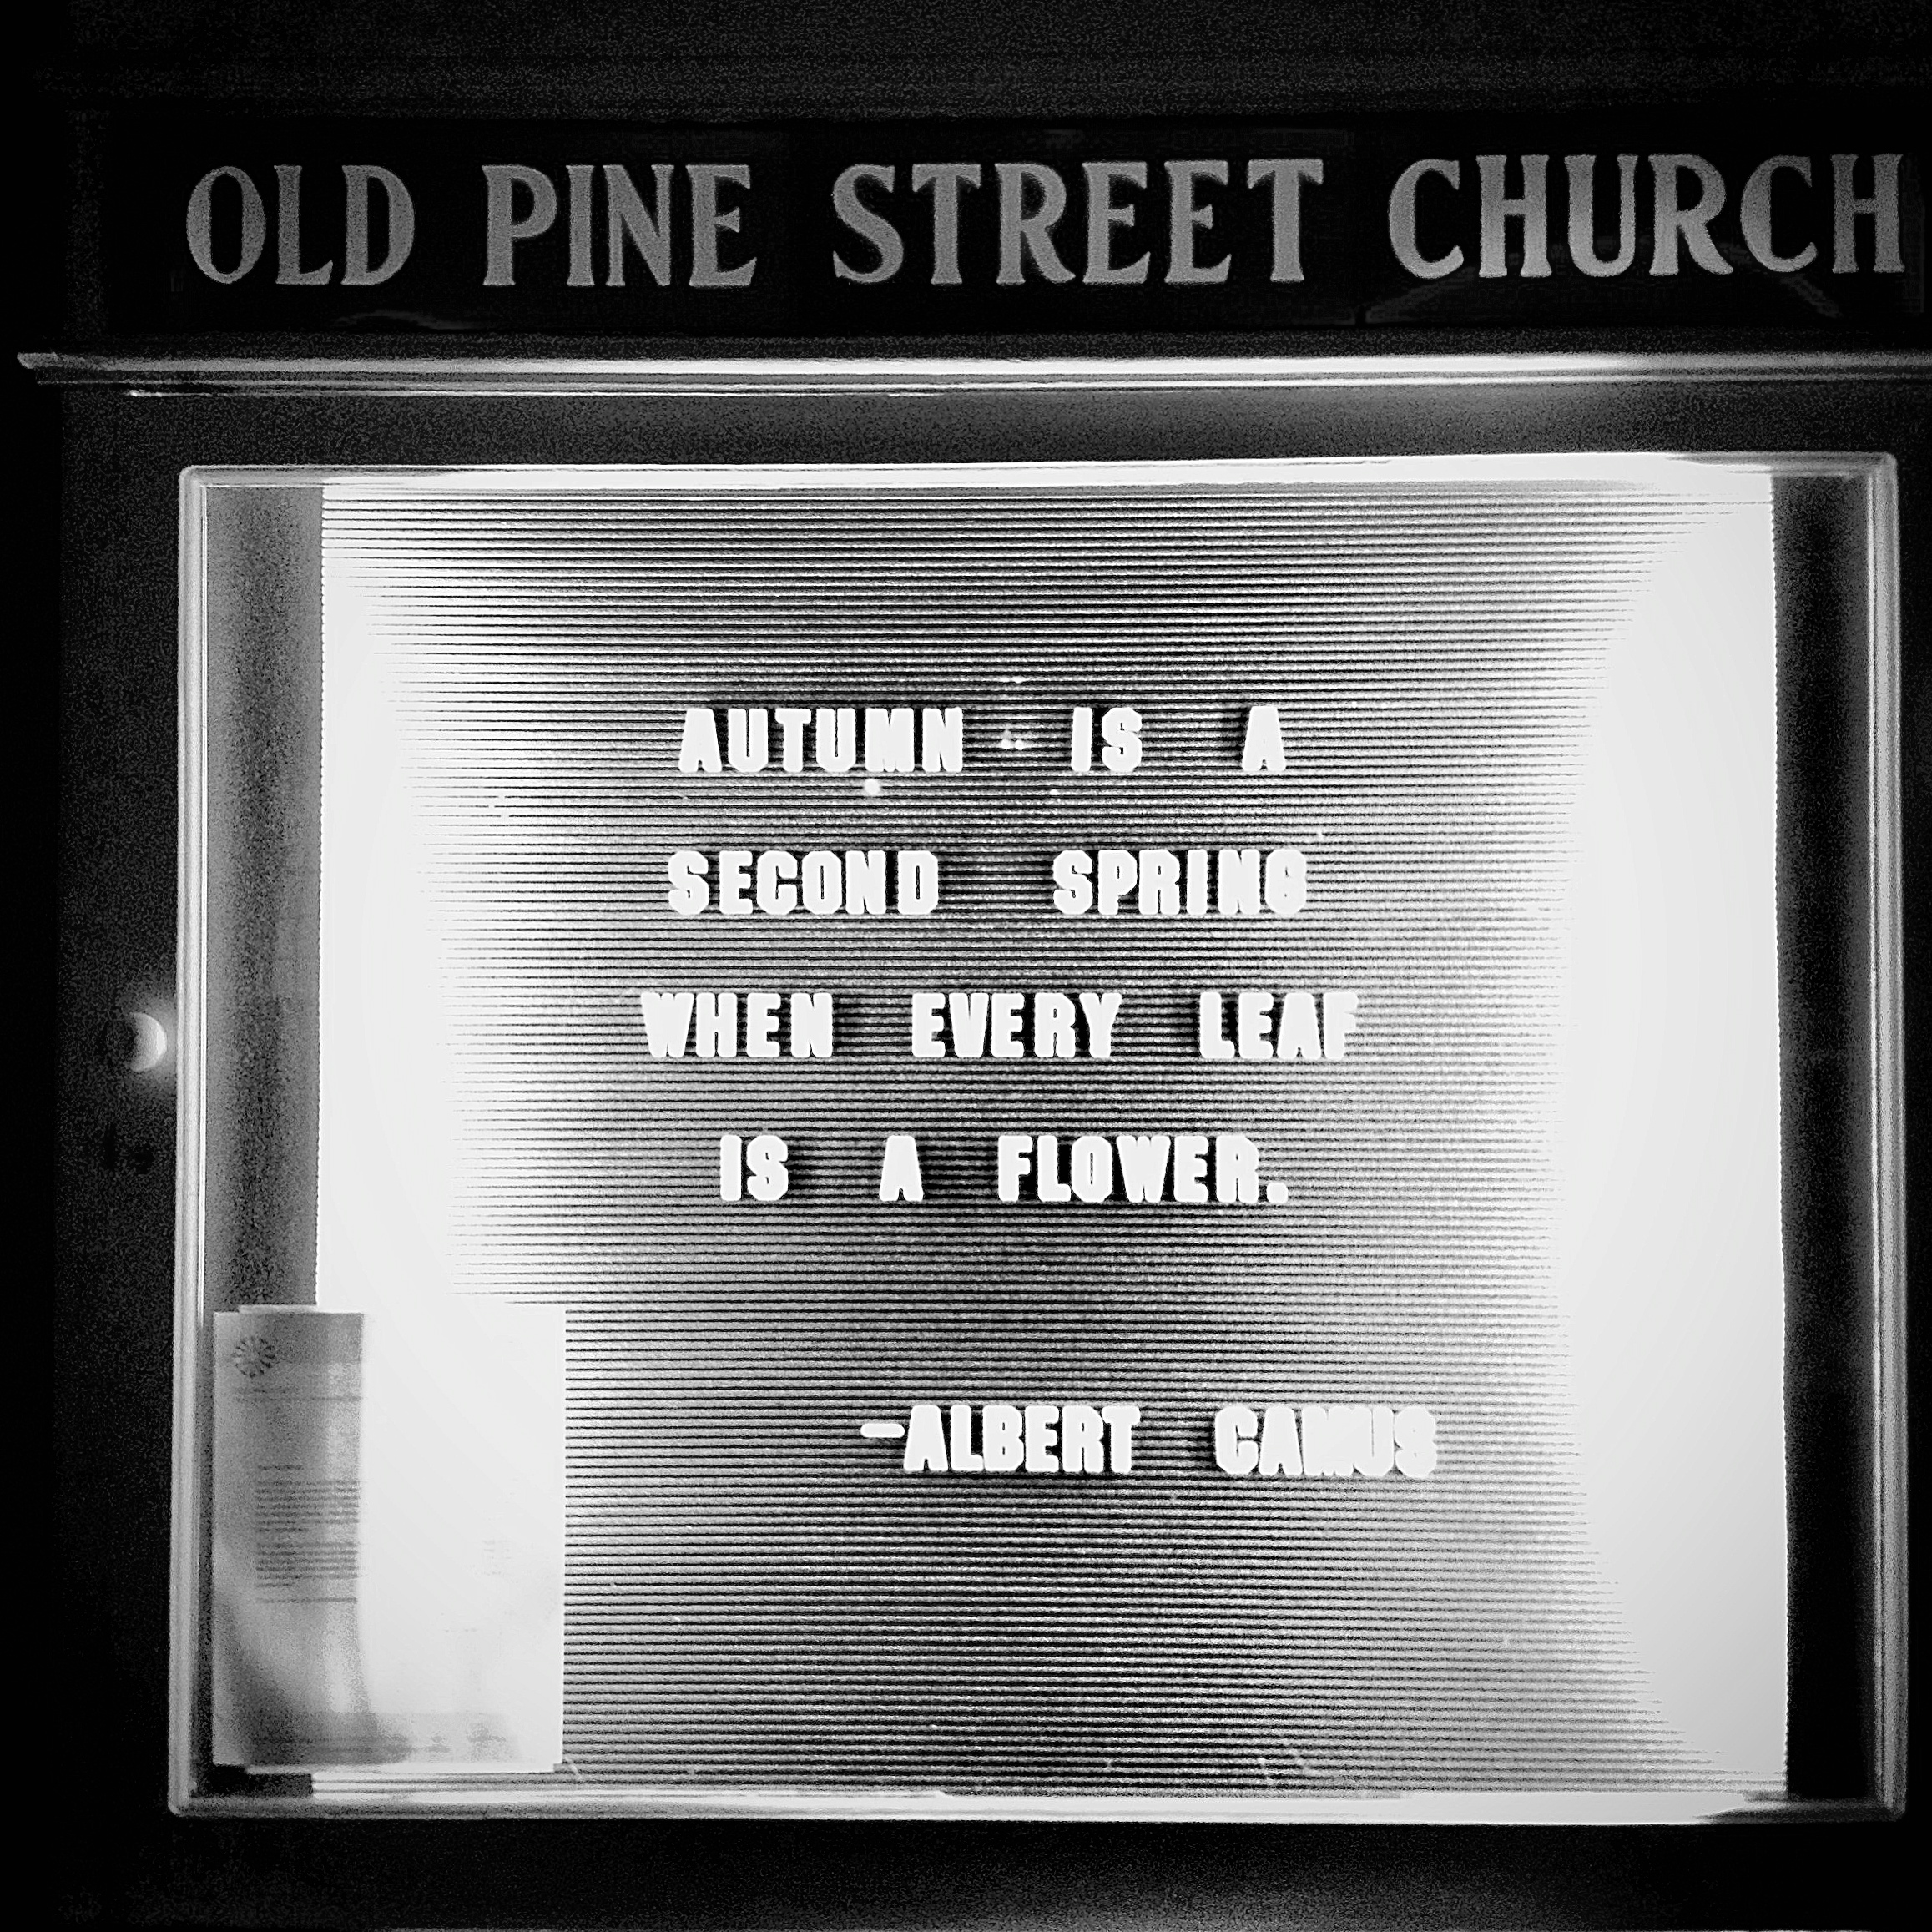 Autumn is a second spring when every leaf is a flower. - Albert Camus, Old Pine Street Church, October 2013